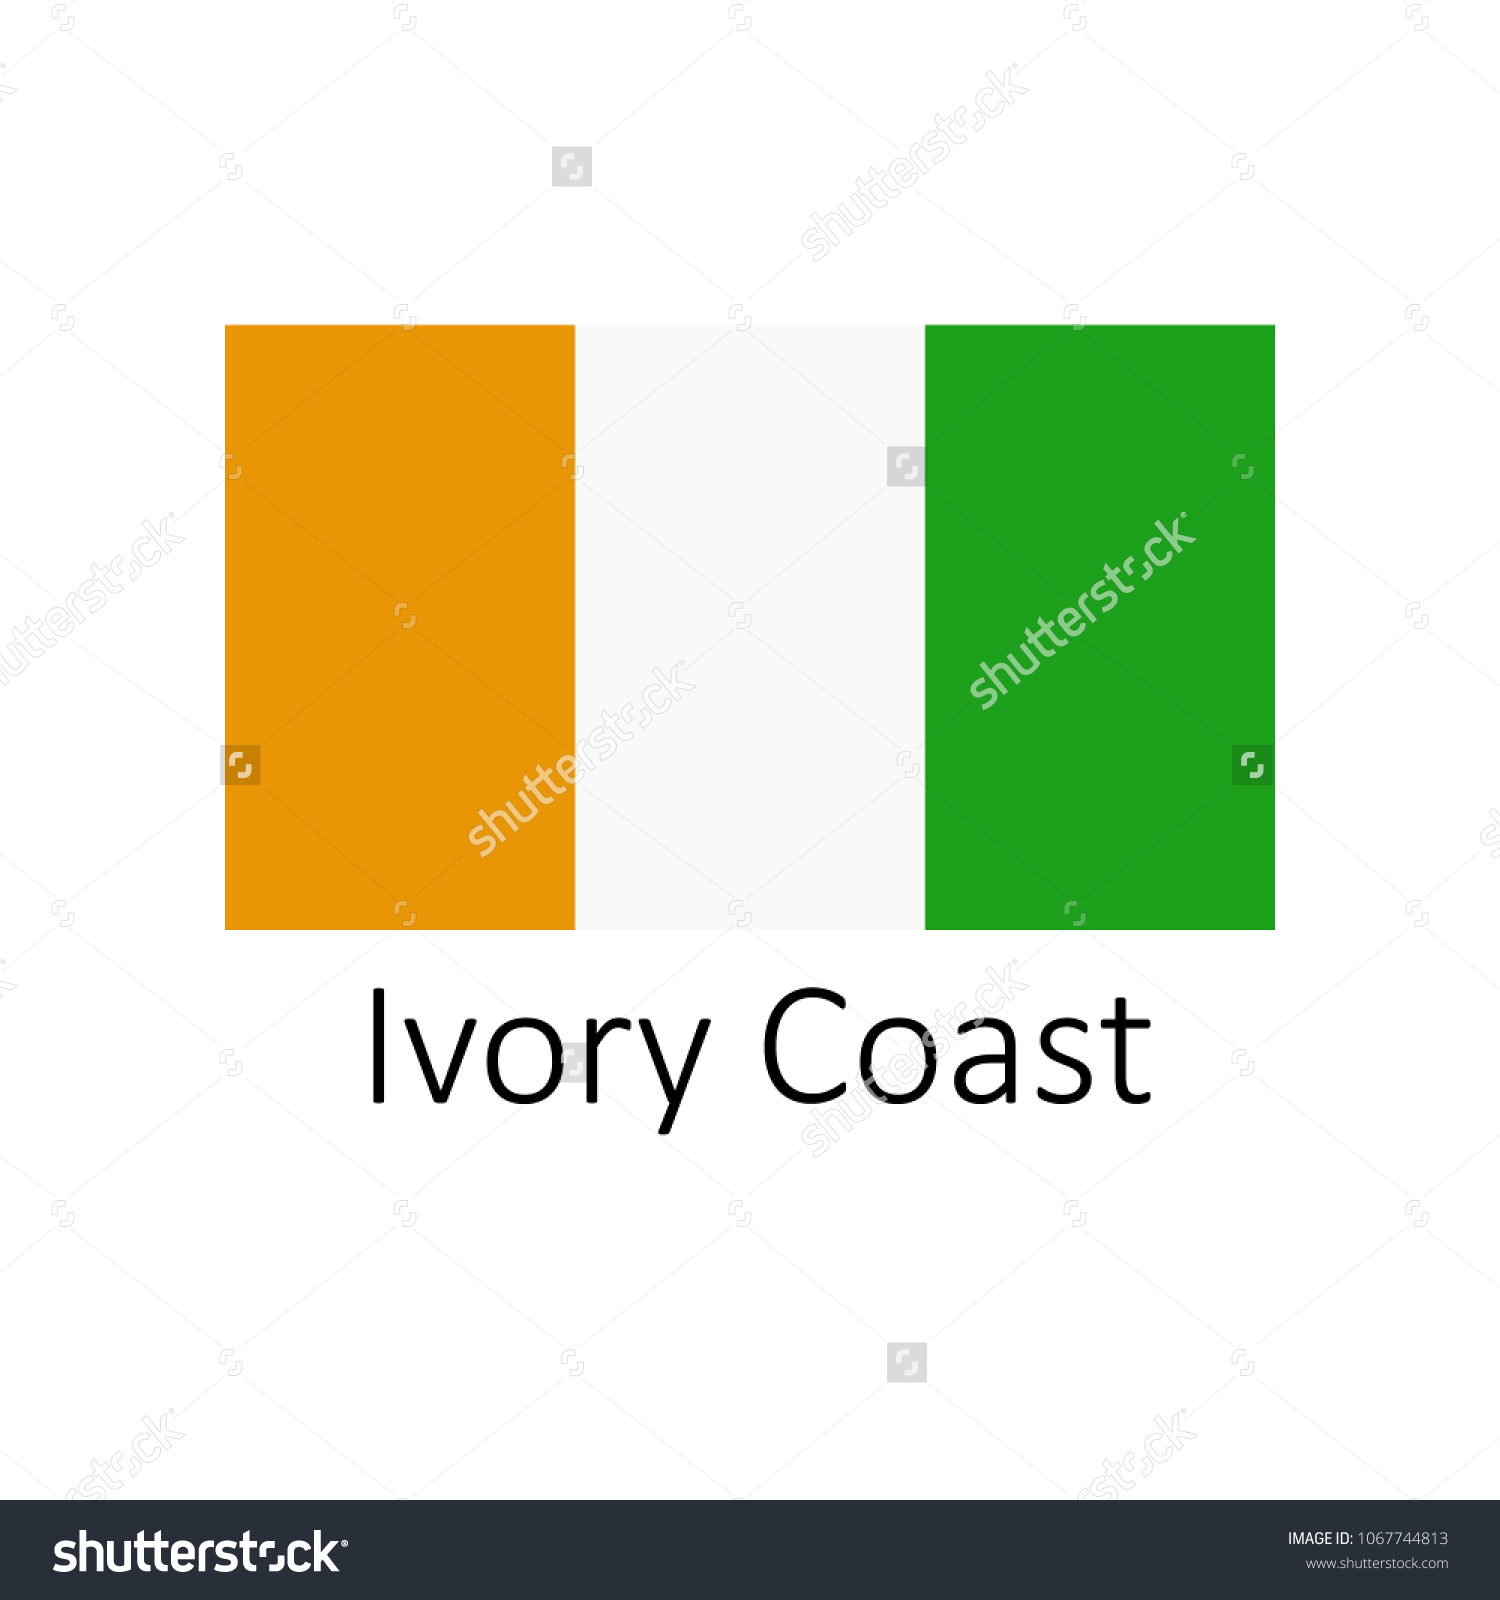 Image result for Ivory Coast name